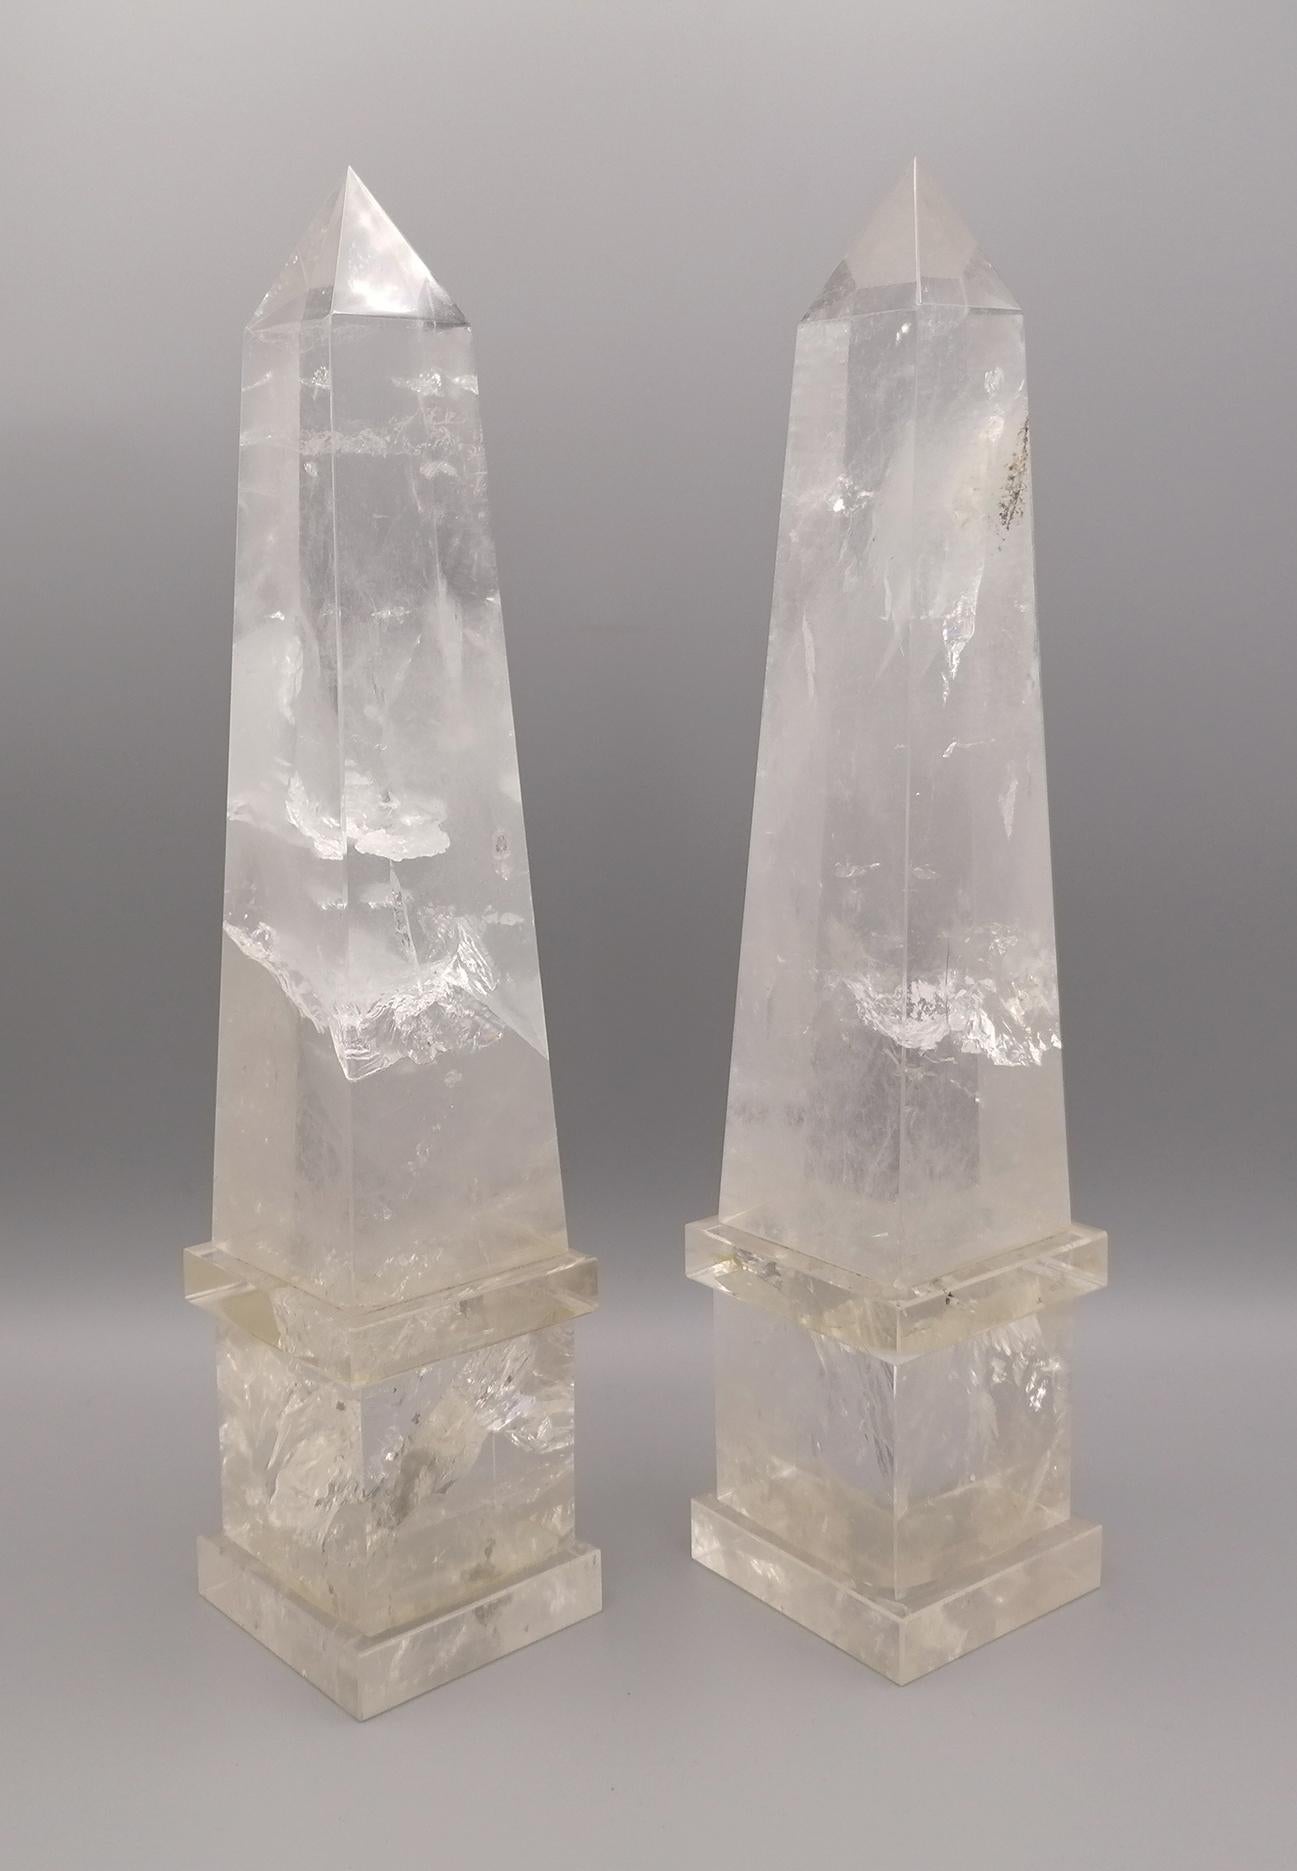 A gorgeous and decorative pair of Mid-Century Modern Italian rock crystal quartz hand carved and hand-polished obelisks. Each obelisk is made of a natural rock crystal quartz which has been hand-diamond cut and hand-polished with the finest detail.